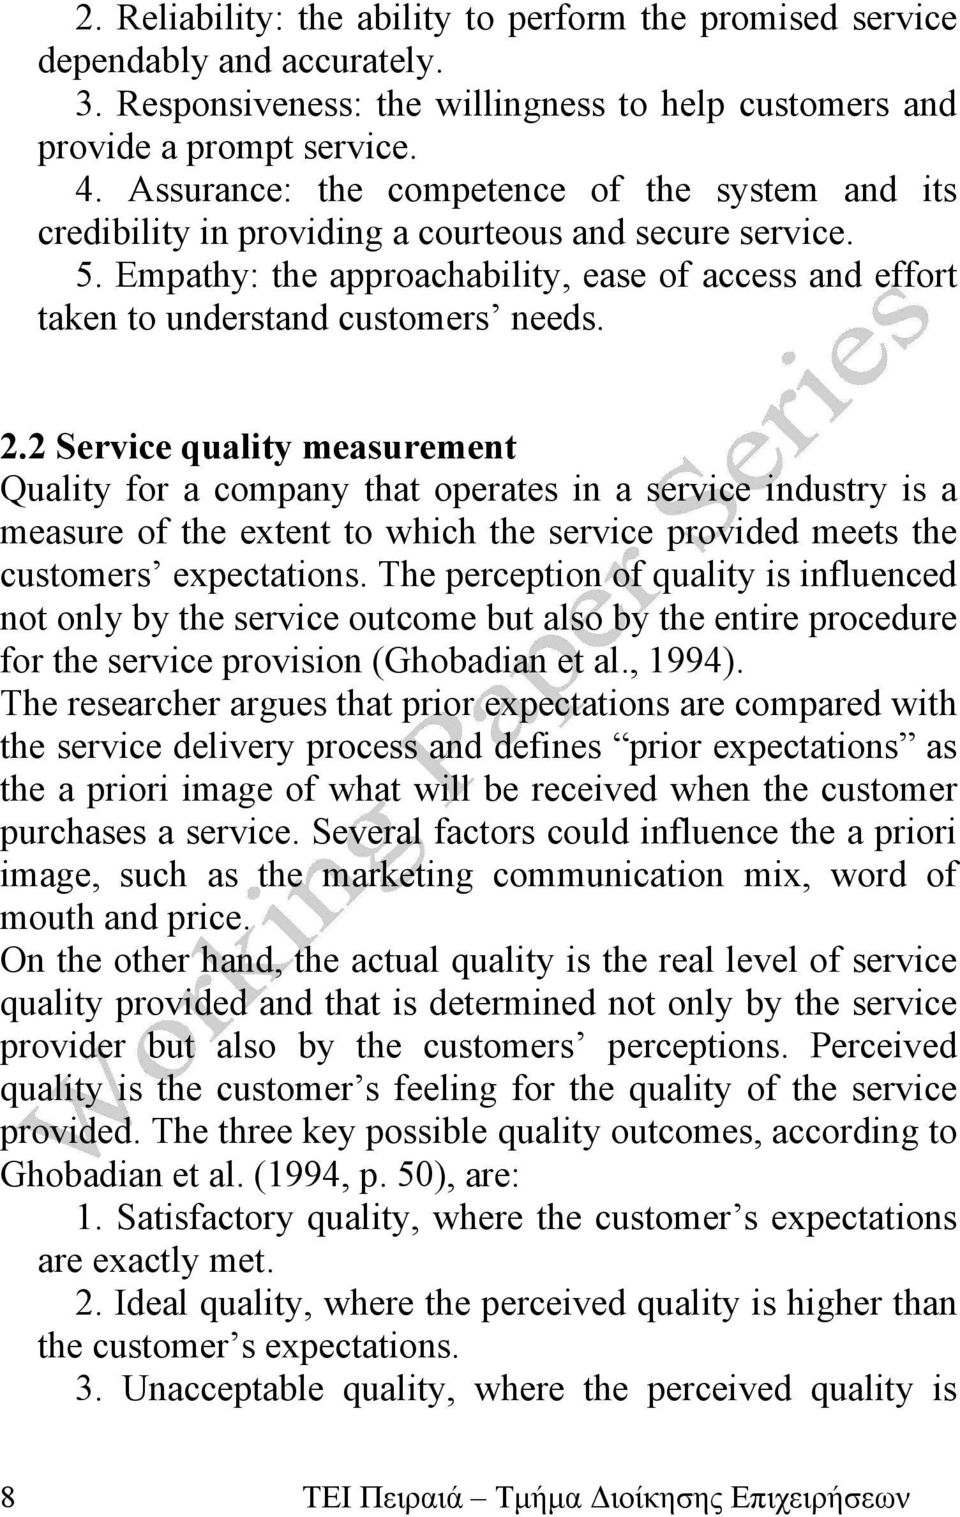 2.2 Service quality measurement Quality for a company that operates in a service industry is a measure of the extent to which the service provided meets the customers expectations.